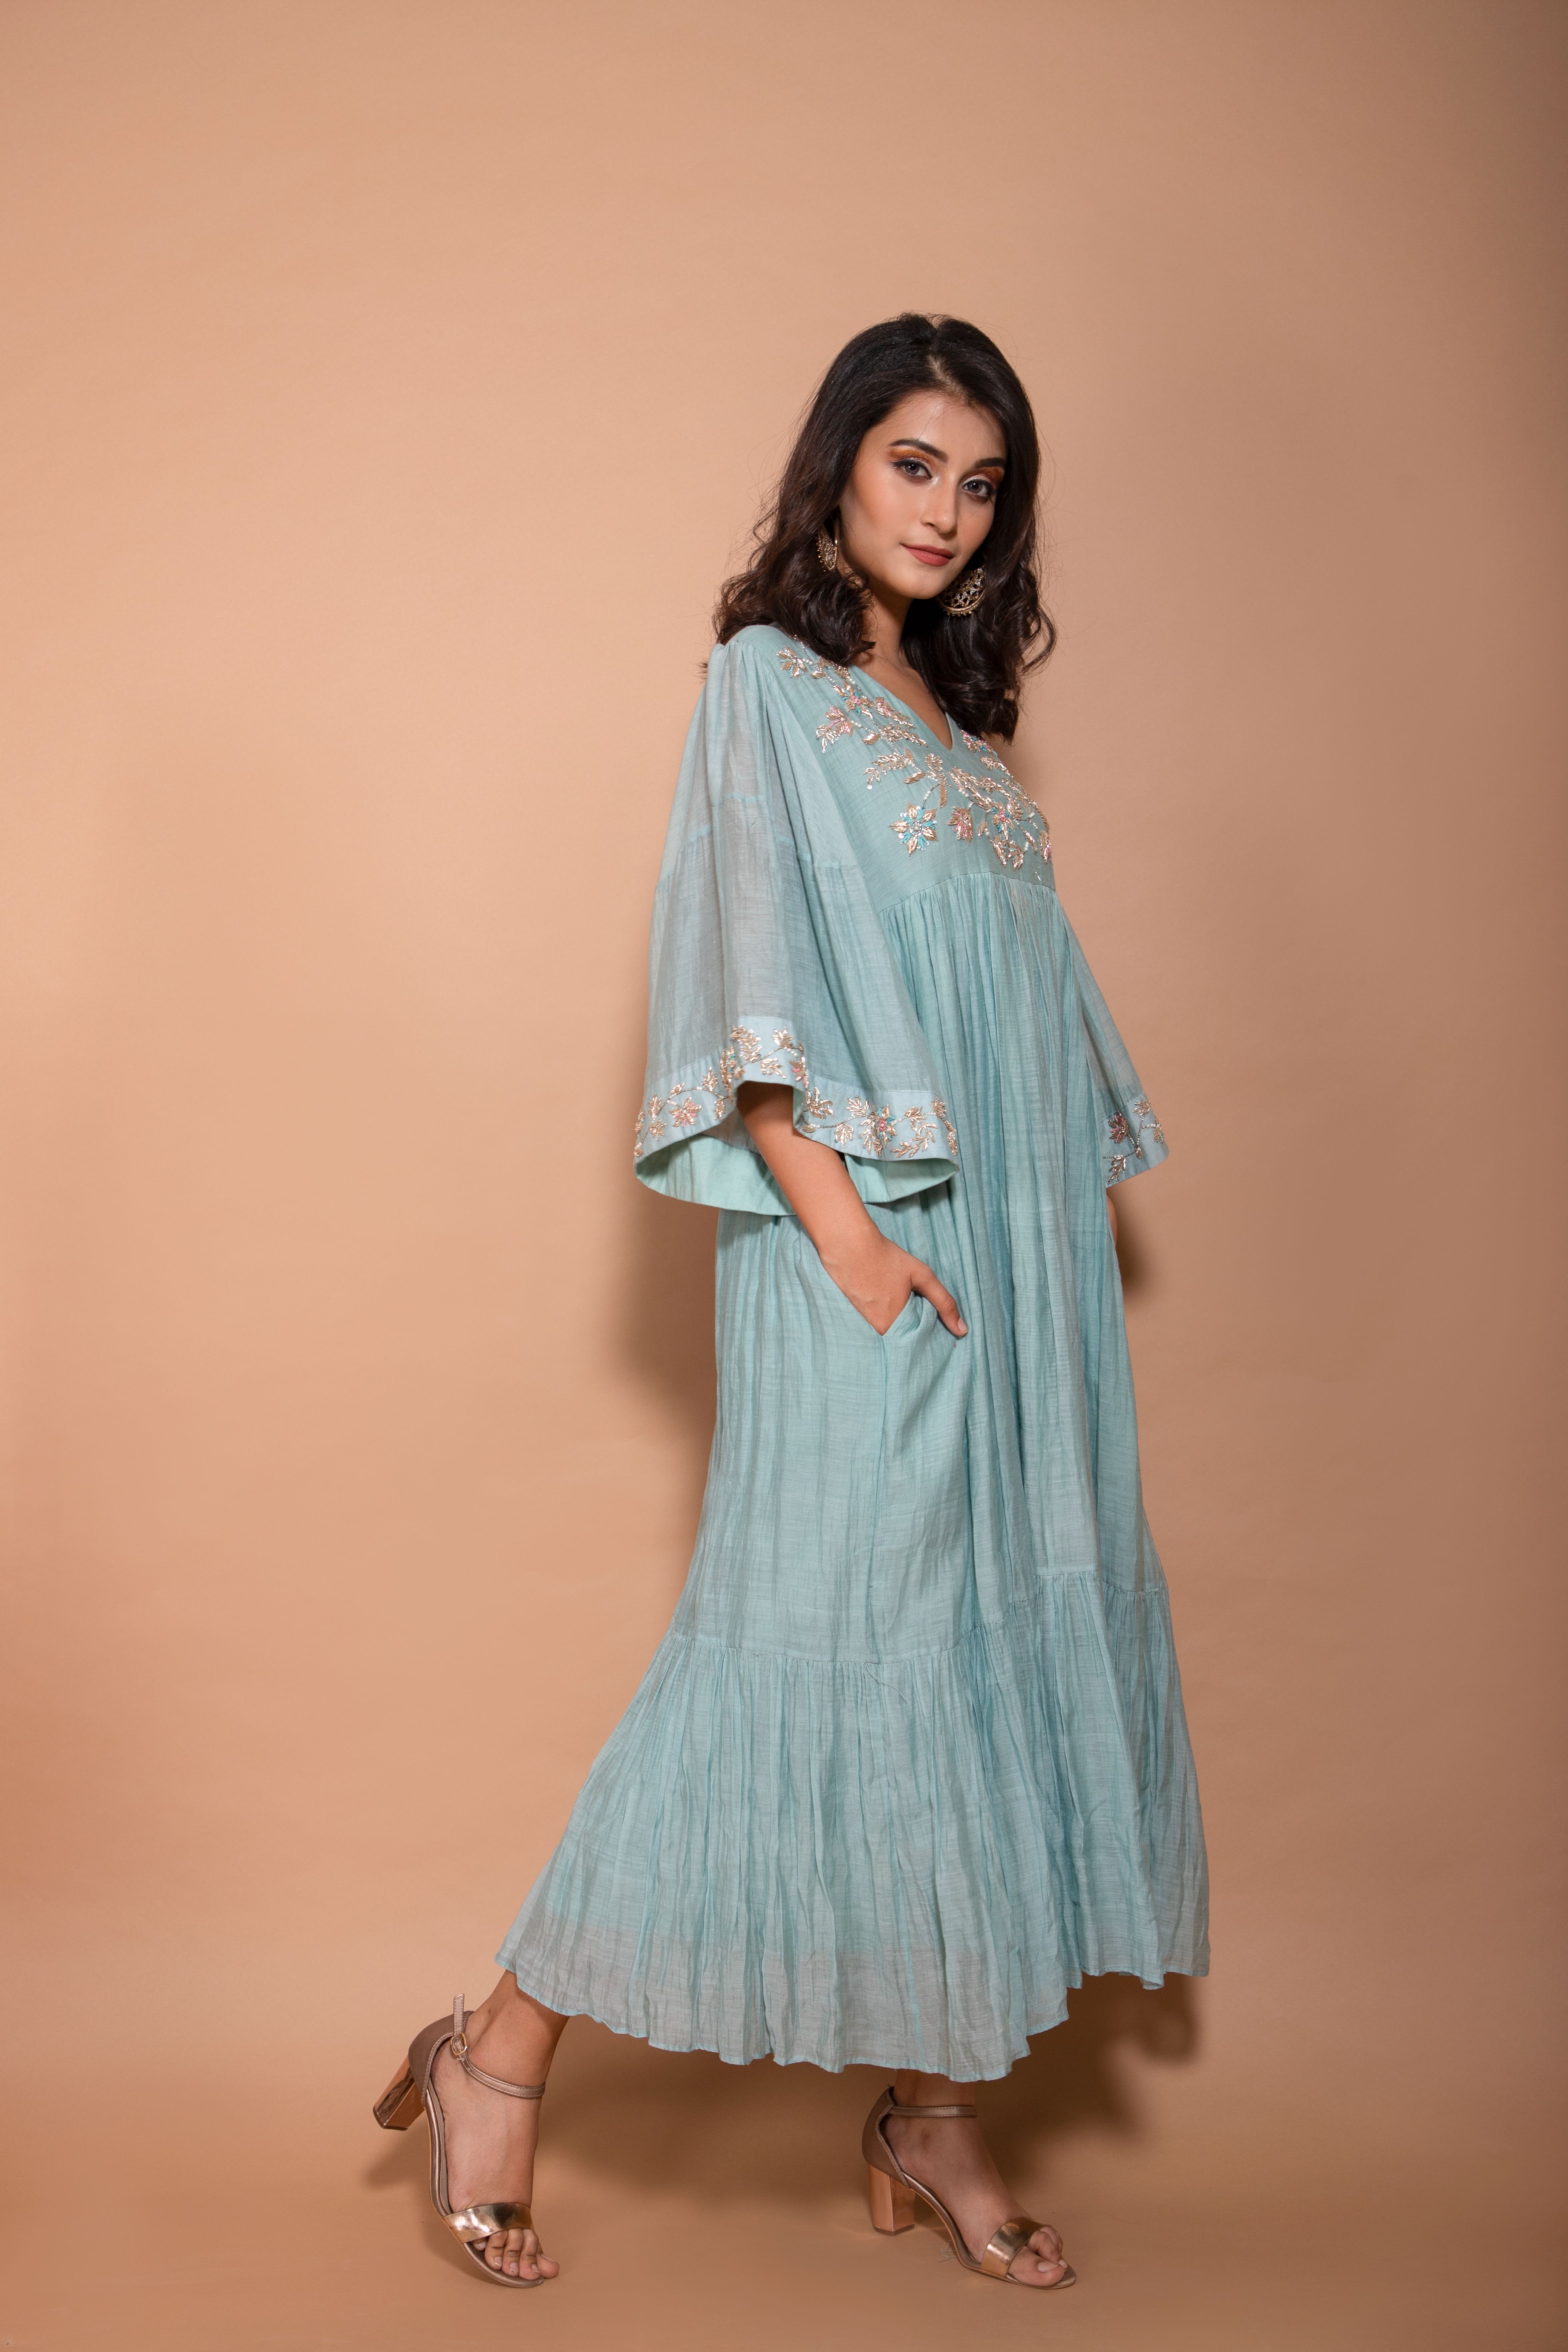 Chandari long dress with work on the yoke and sleeves and it comes with bell sleeves